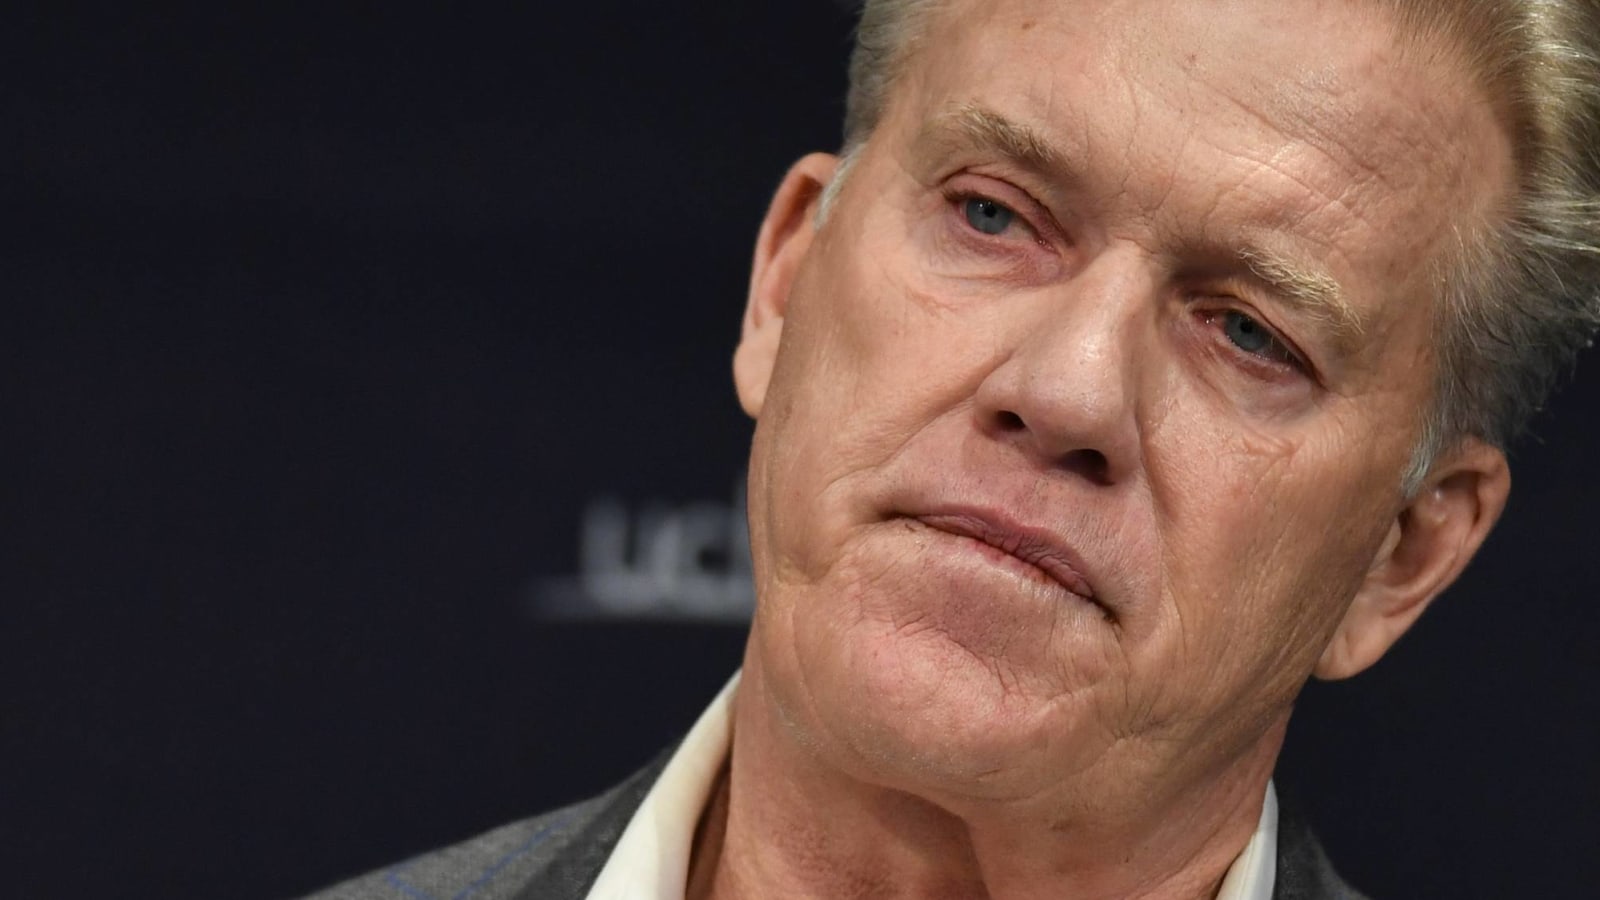 John Elway has made a mess of Broncos. Now it's time for him to go.